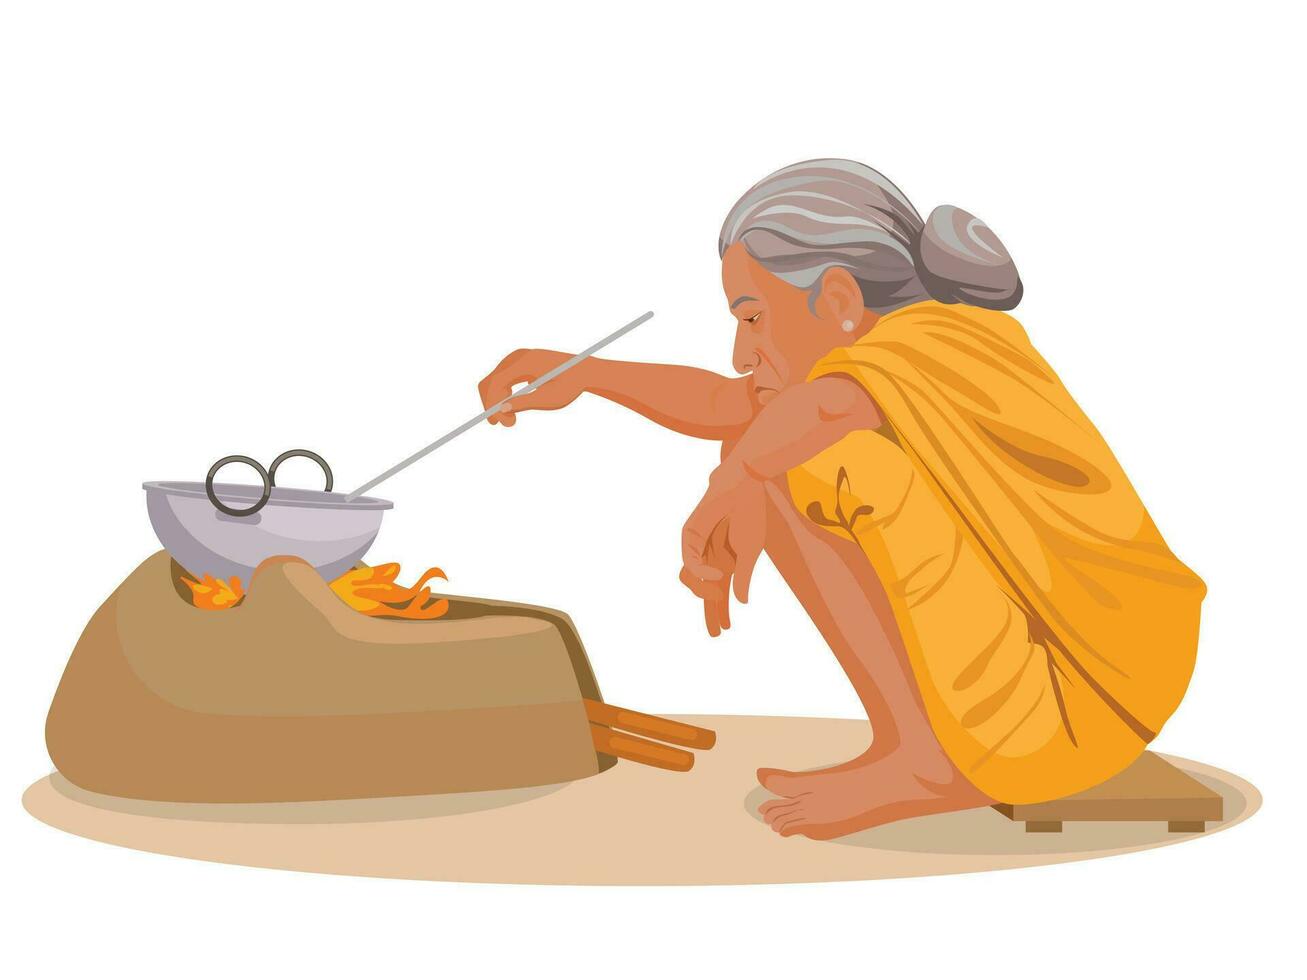 Indian Old Woman Making Or Cooking Food In an Ancient Or Old Kitchen vector